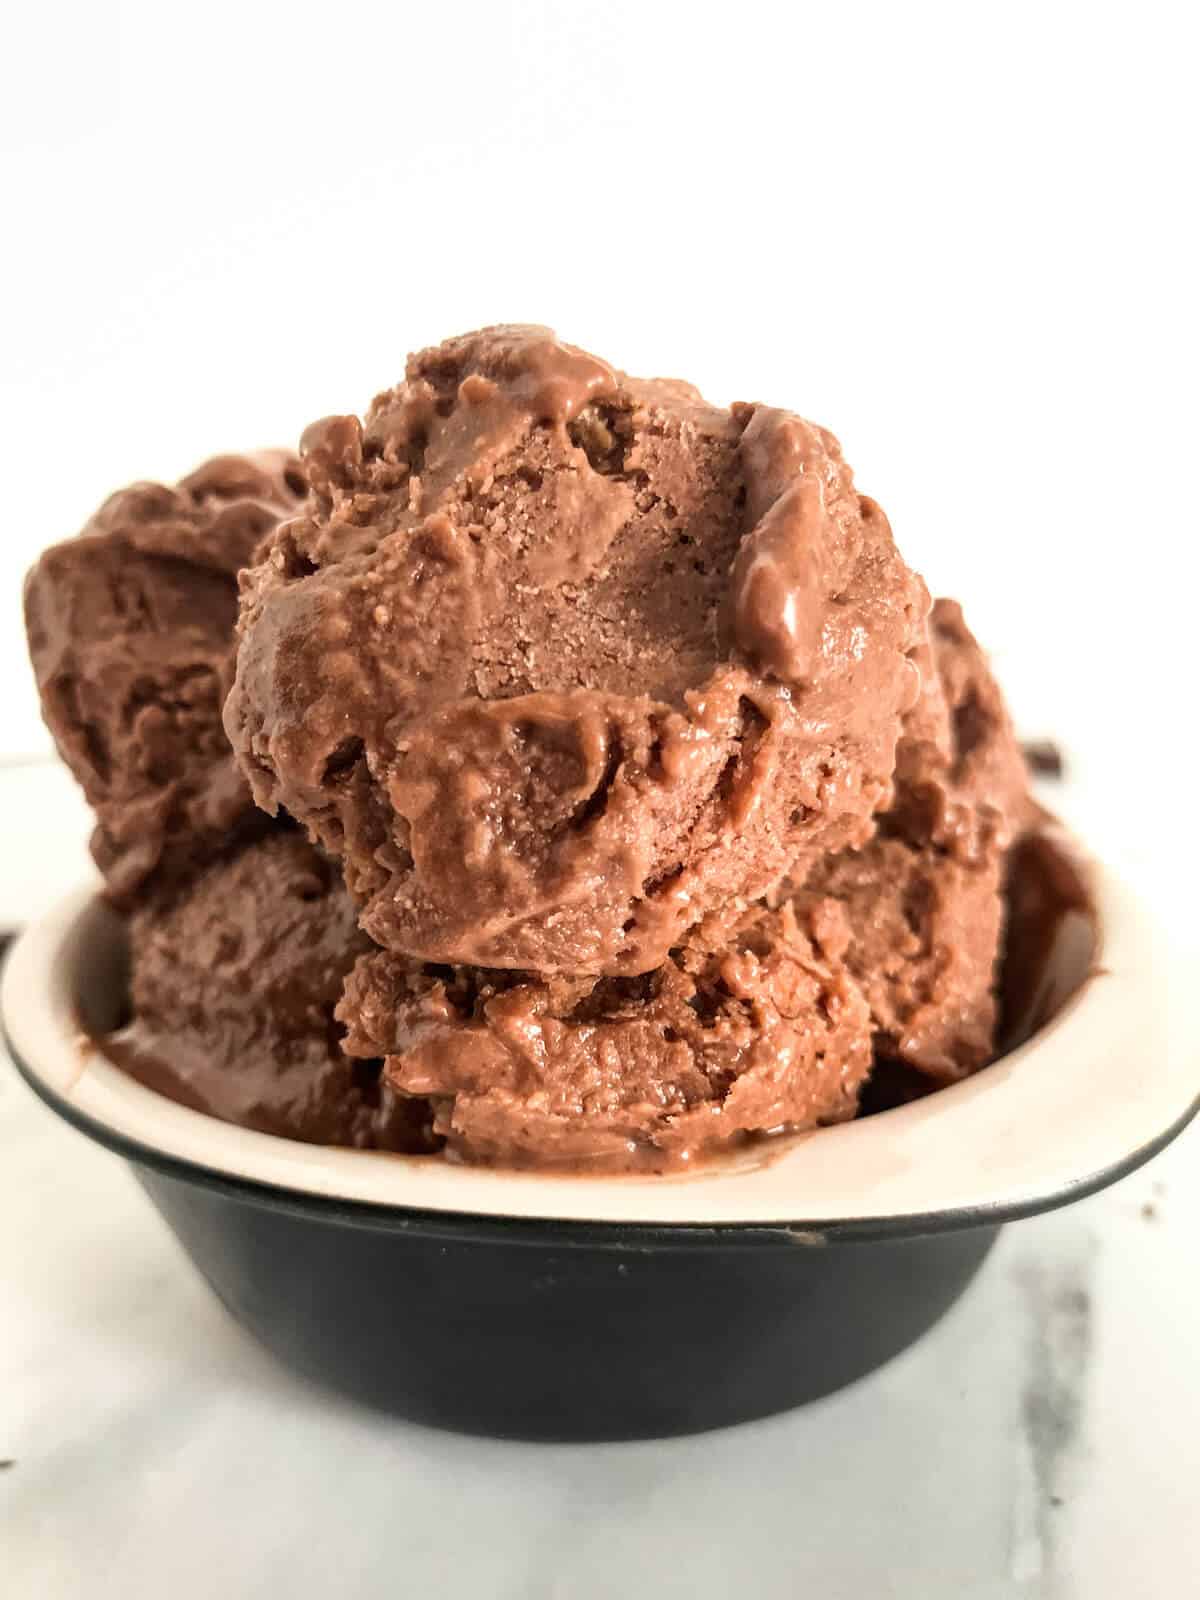 chocolate peanut butter ice cream in a black and white ceramic bowl 